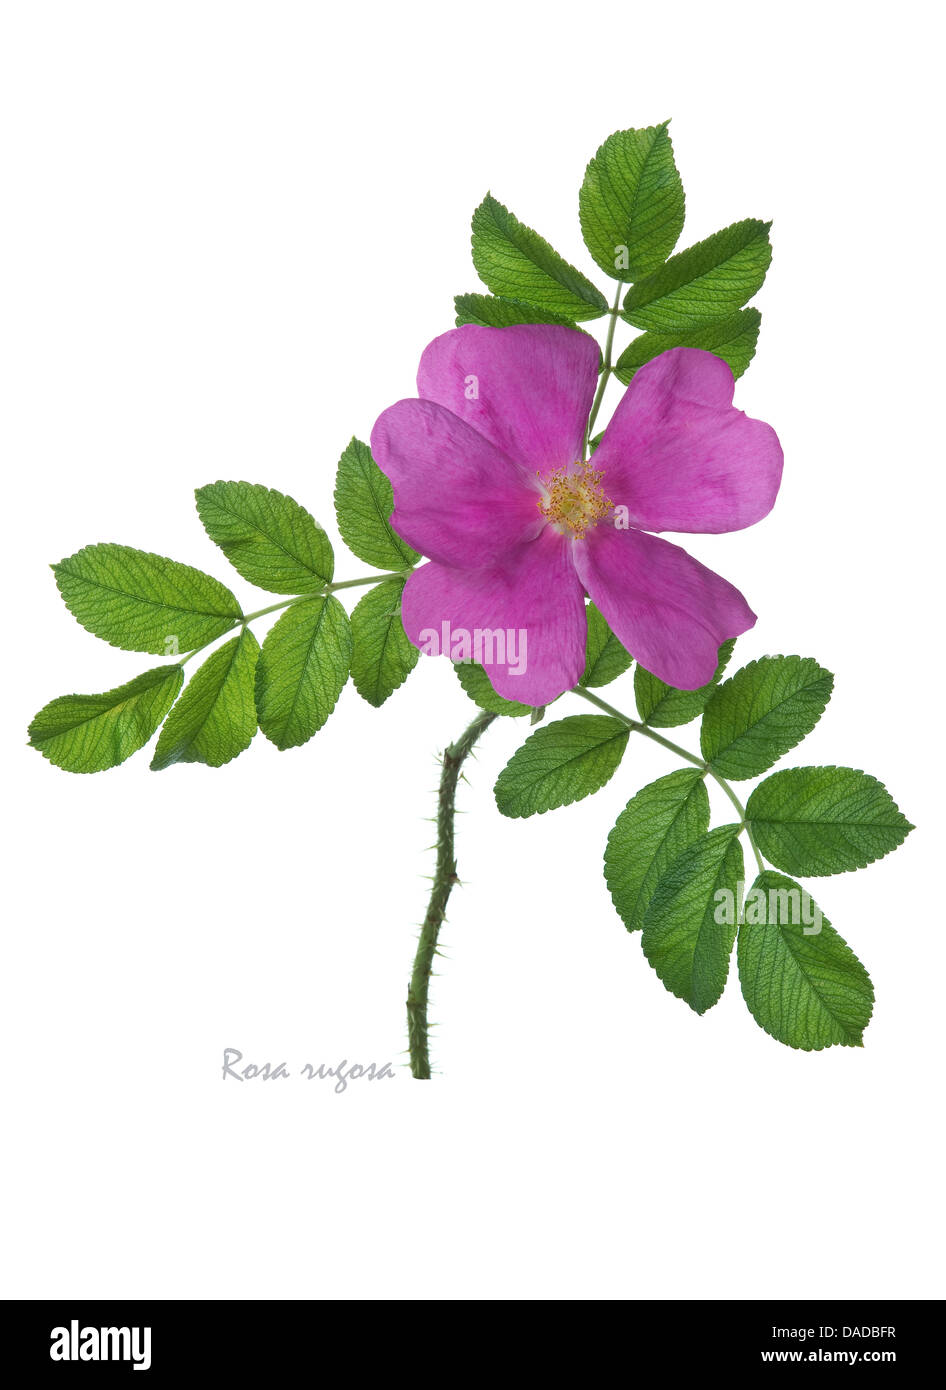 Rugosa rose = Japanese rose = Ramanas rose (Rosa rugosa) flower and leaves on the white background Stock Photo